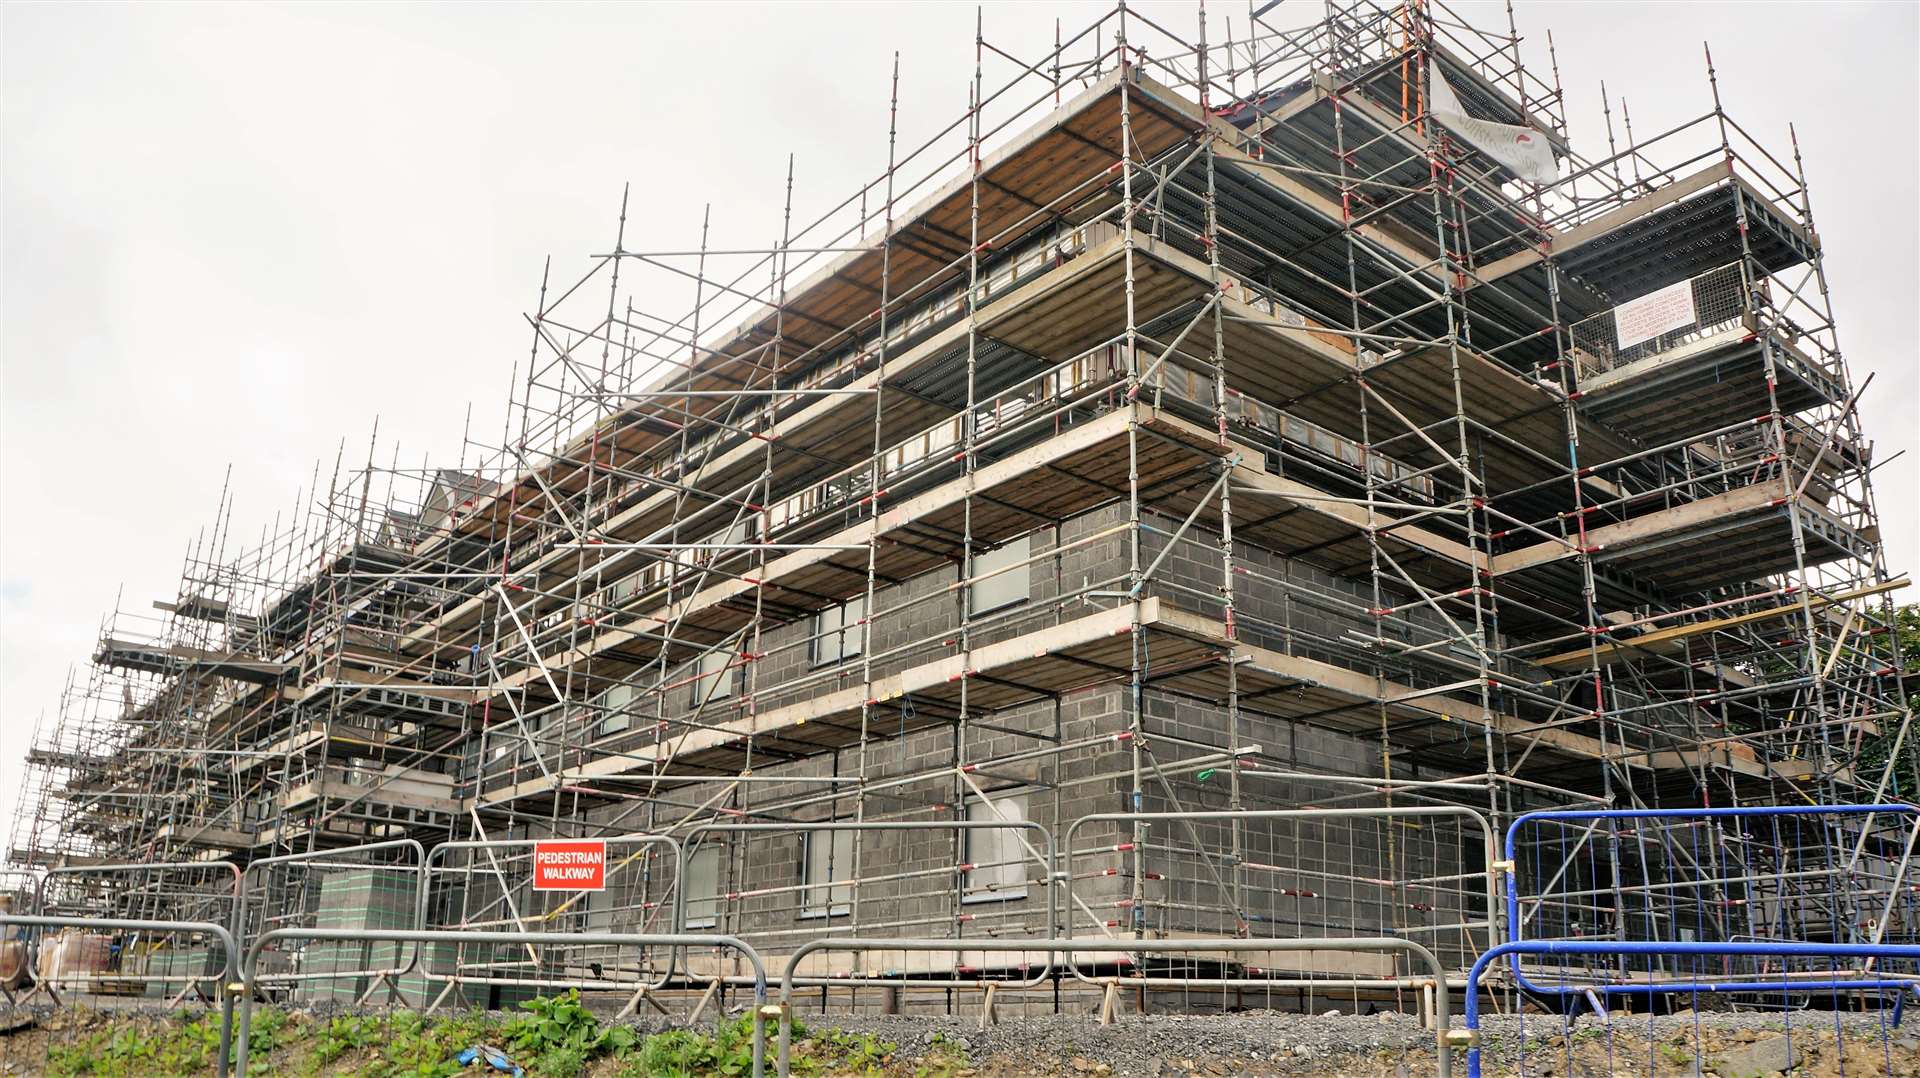 The new Premier Inn being constructed at Ormlie Road in Thurso where a theft was reported this week. Picture: DGS